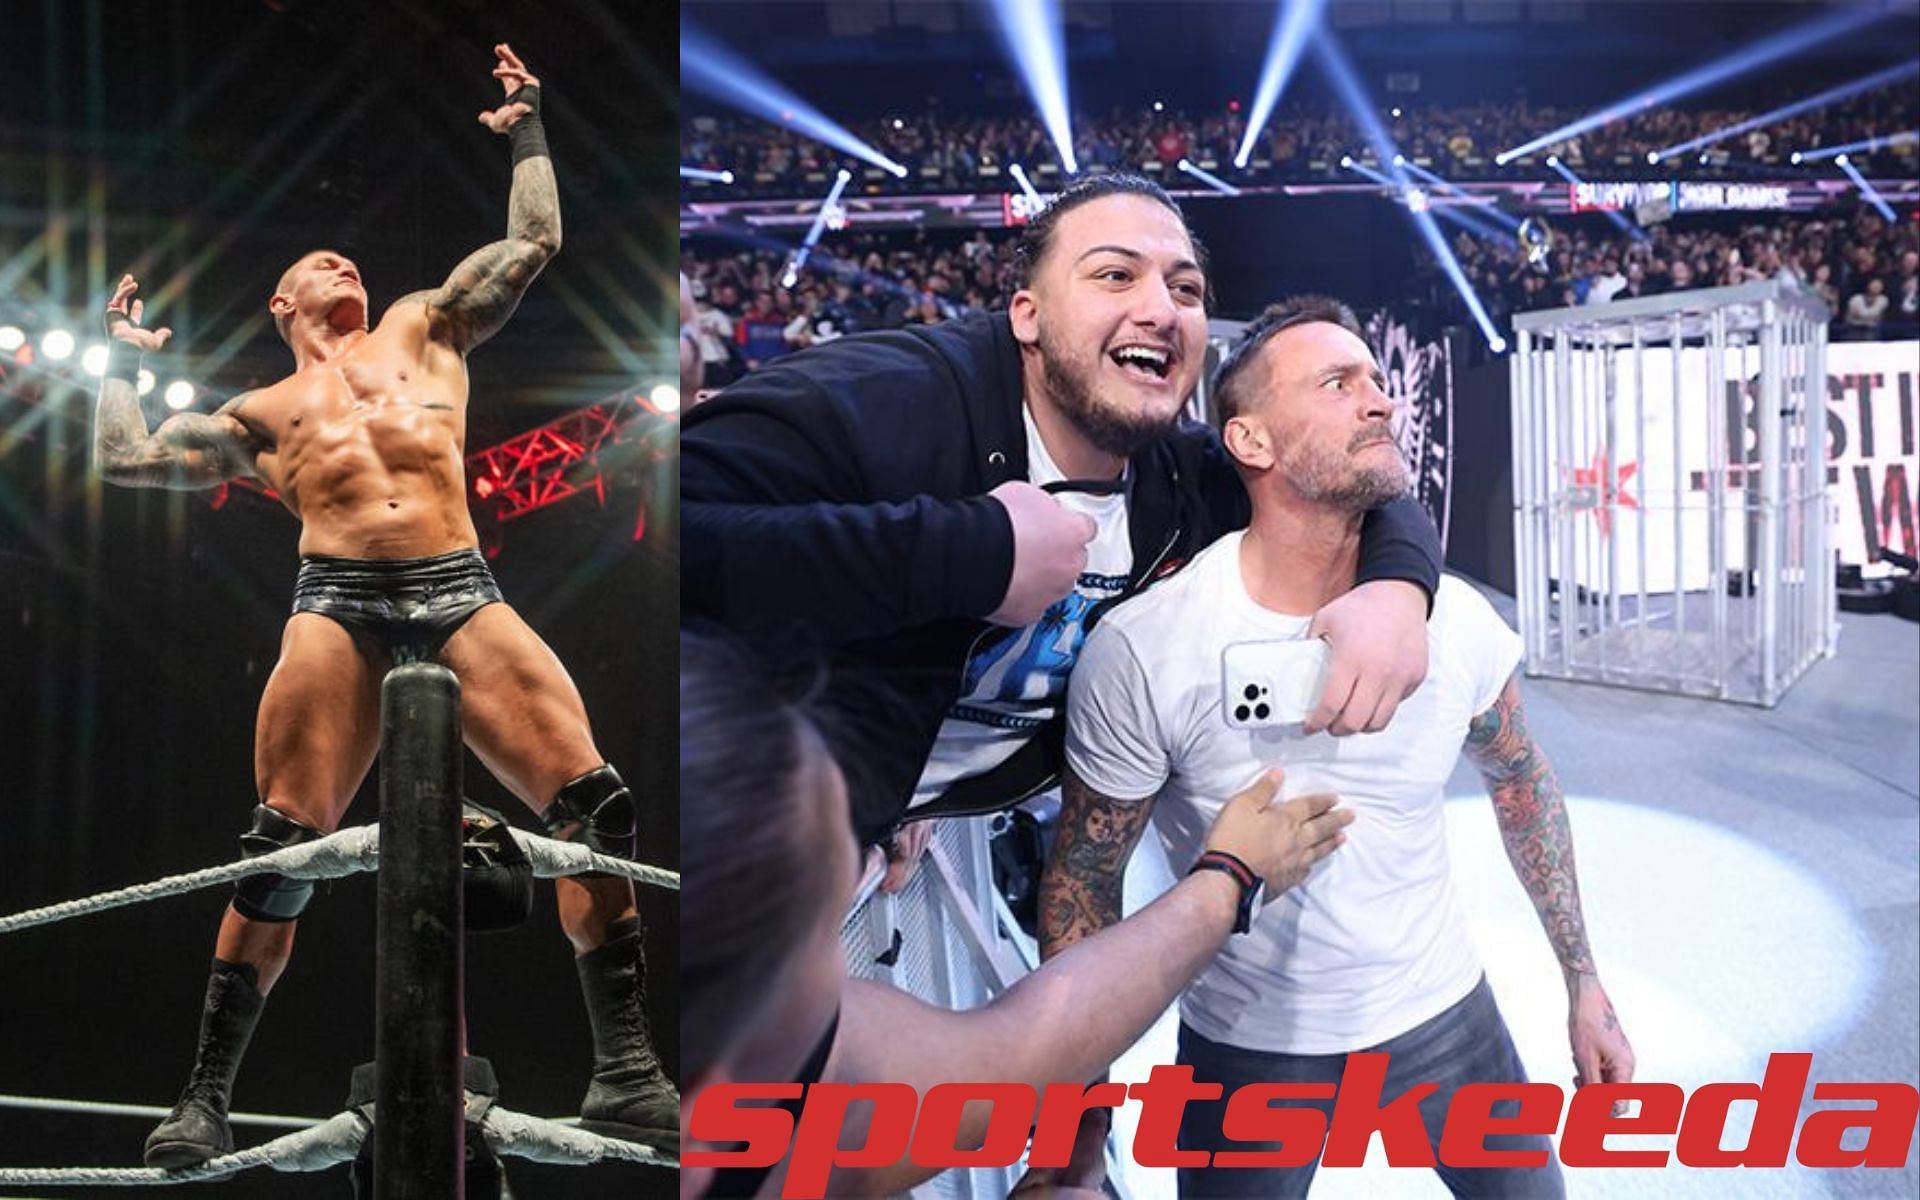 Randy Orton could be the first to hand CM Punk a loss!